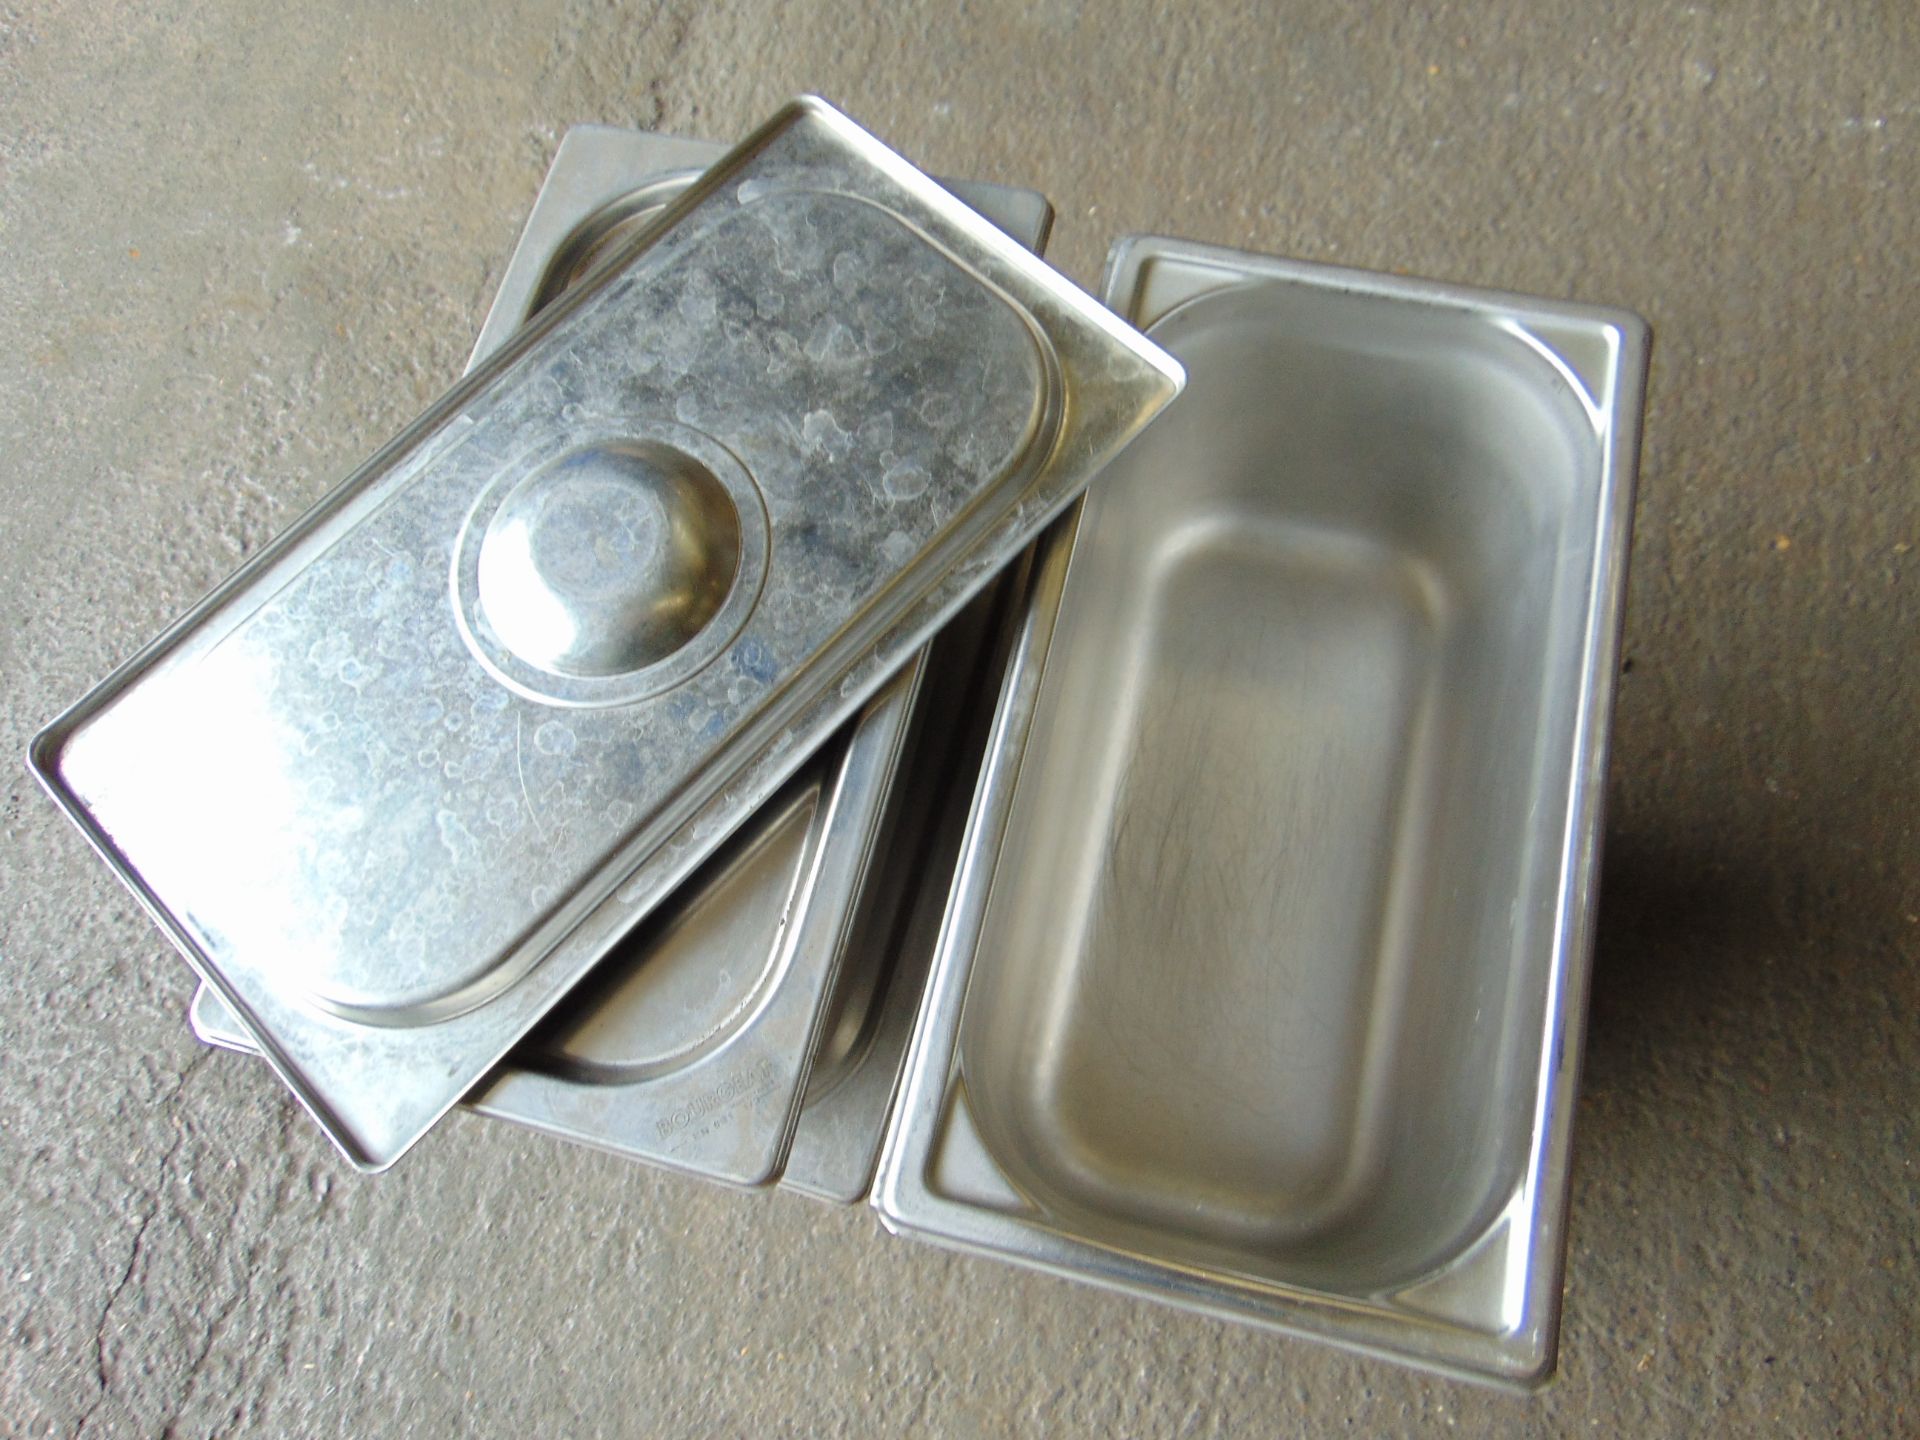 6 x Stainless Steel British Army Bourgeat Gastronorm Pans as shown - Image 3 of 4